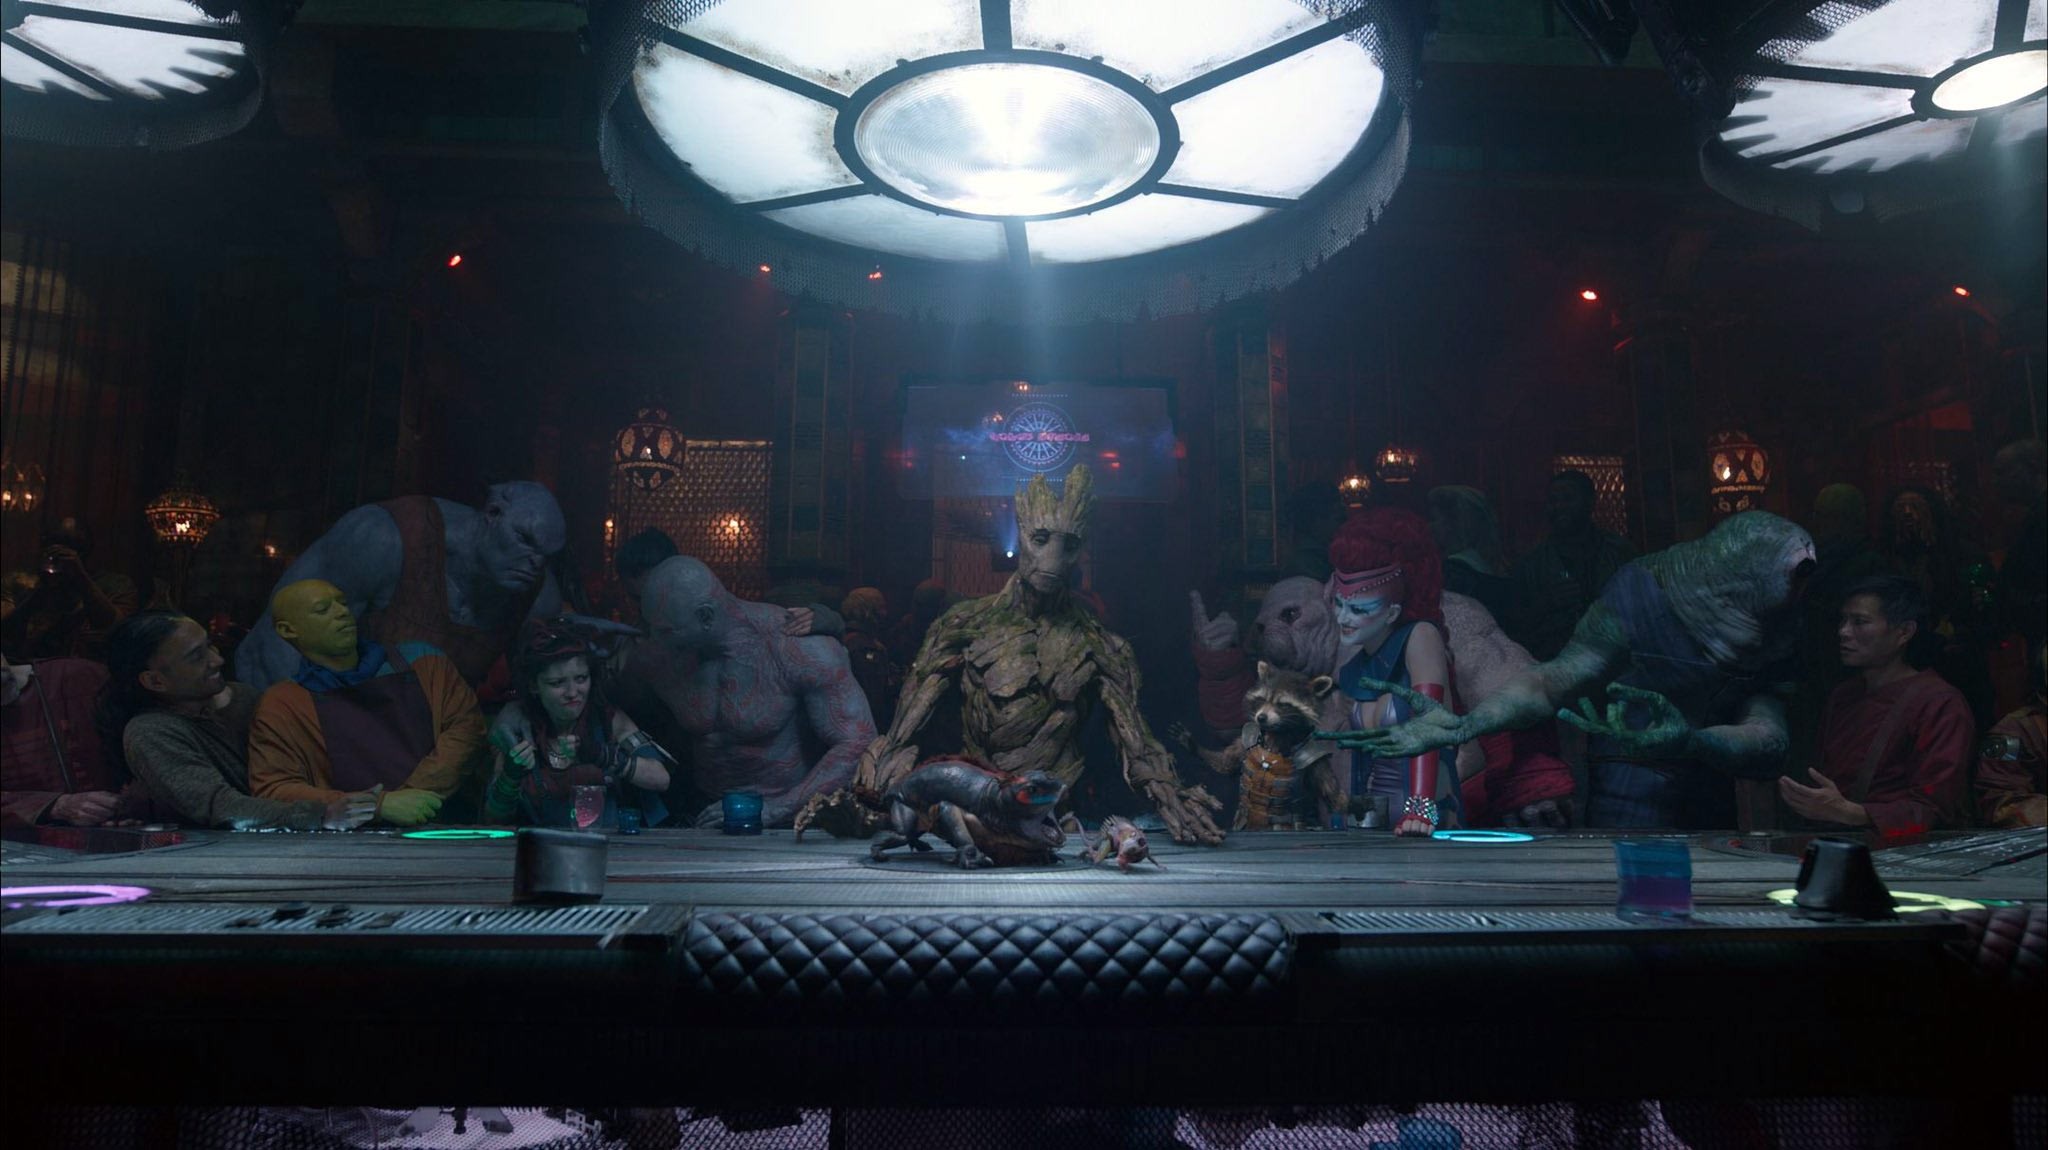 General 2048x1150 Guardians of the Galaxy Groot Drax the Destroyer Marvel Cinematic Universe movies digital art low light Rocket Raccoon The Last Supper parody